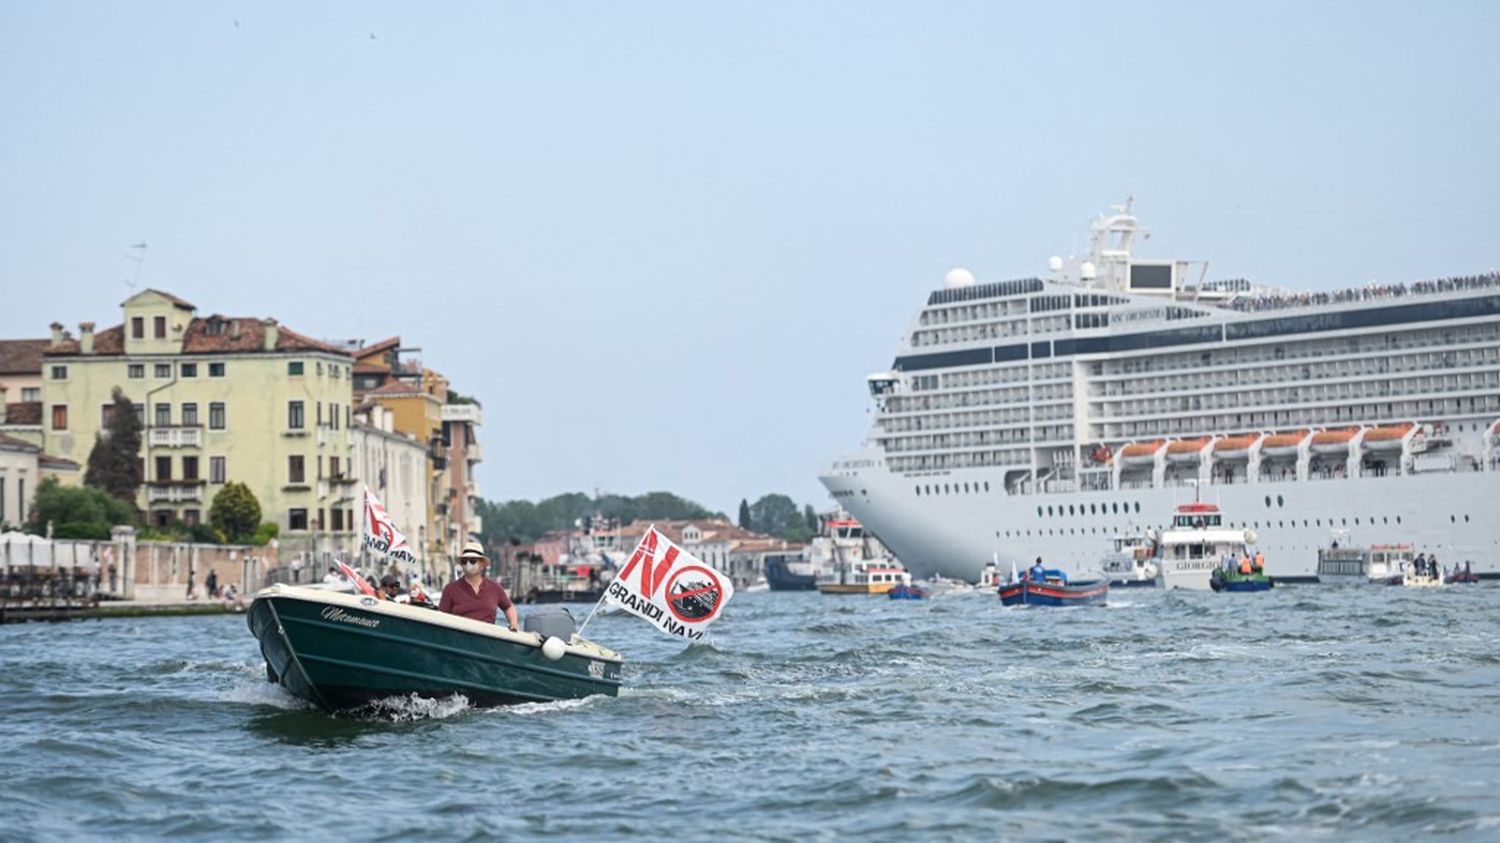 In a controversial atmosphere, Venice reopens its lake for cruises

